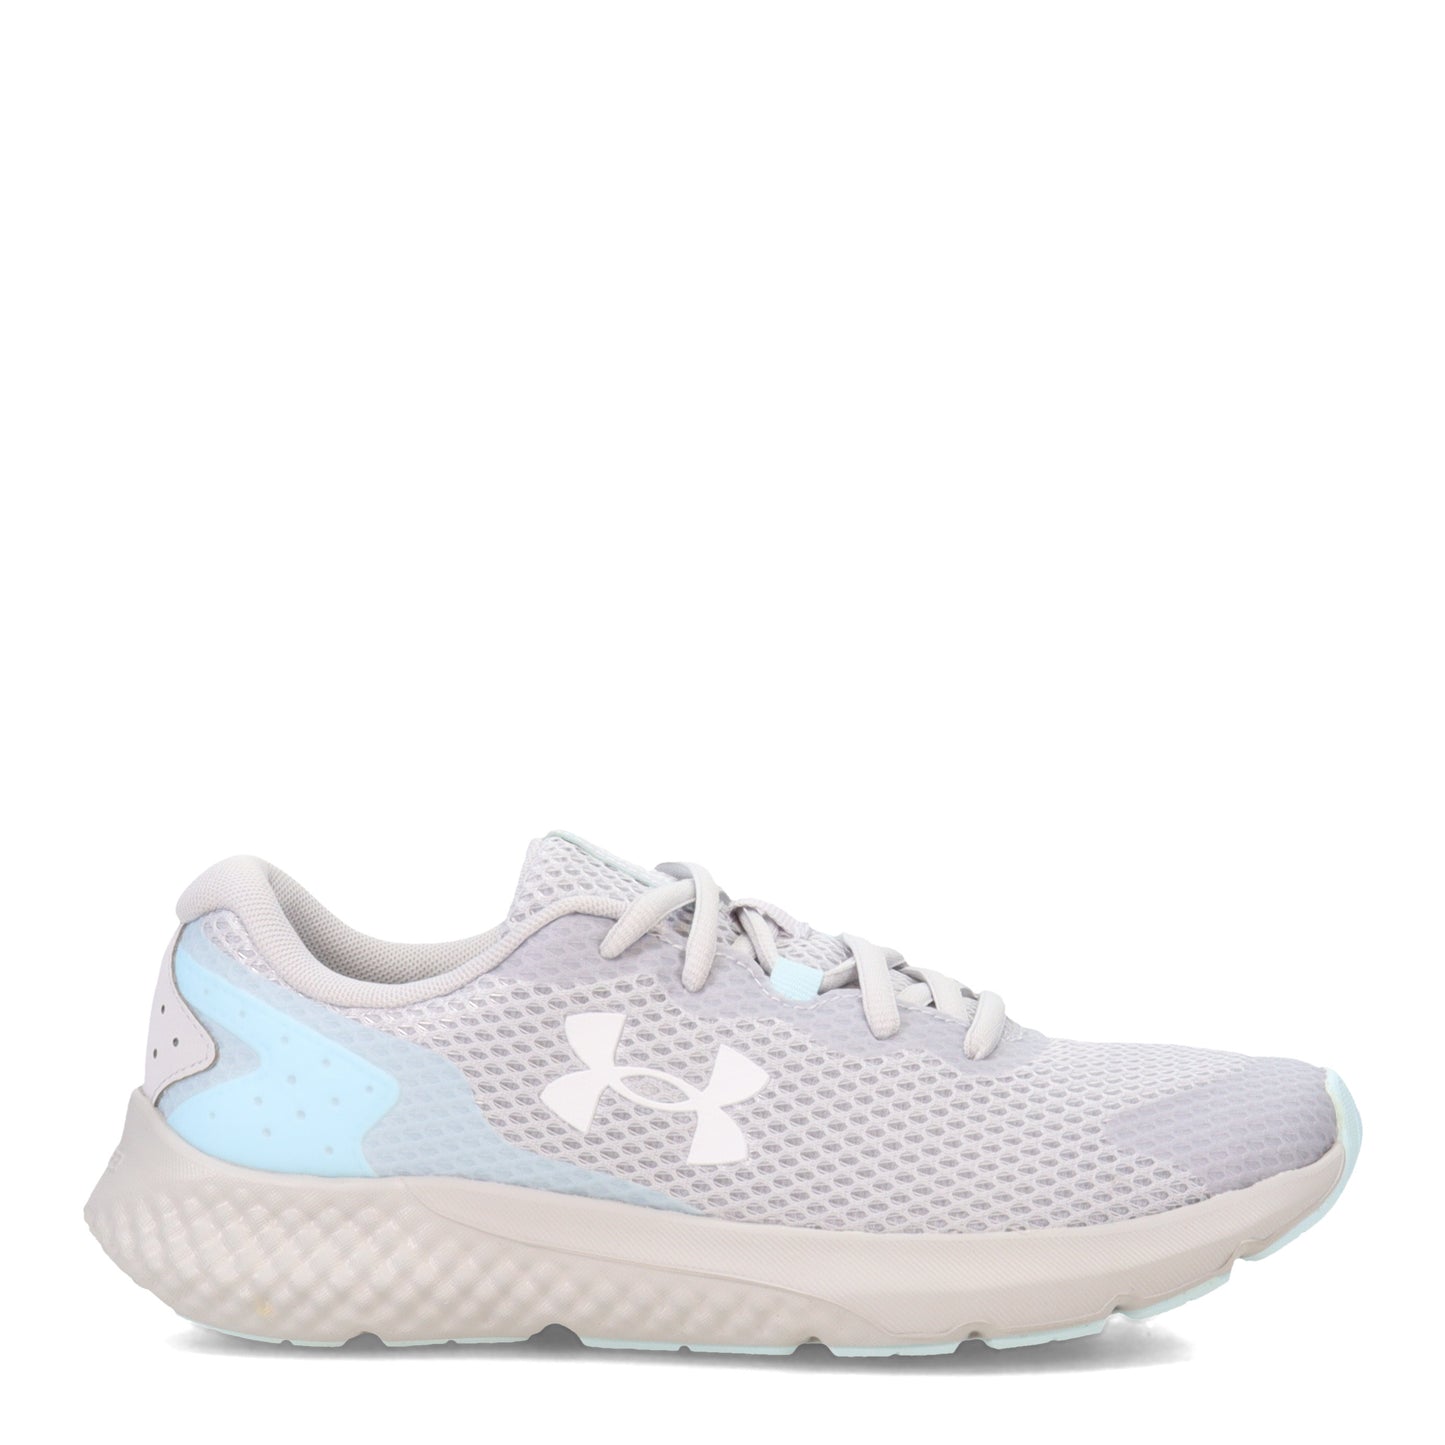 Peltz Shoes  Women's Under Armour Charged Rogue 3 Running Shoe HALO GRAY 3024888-108